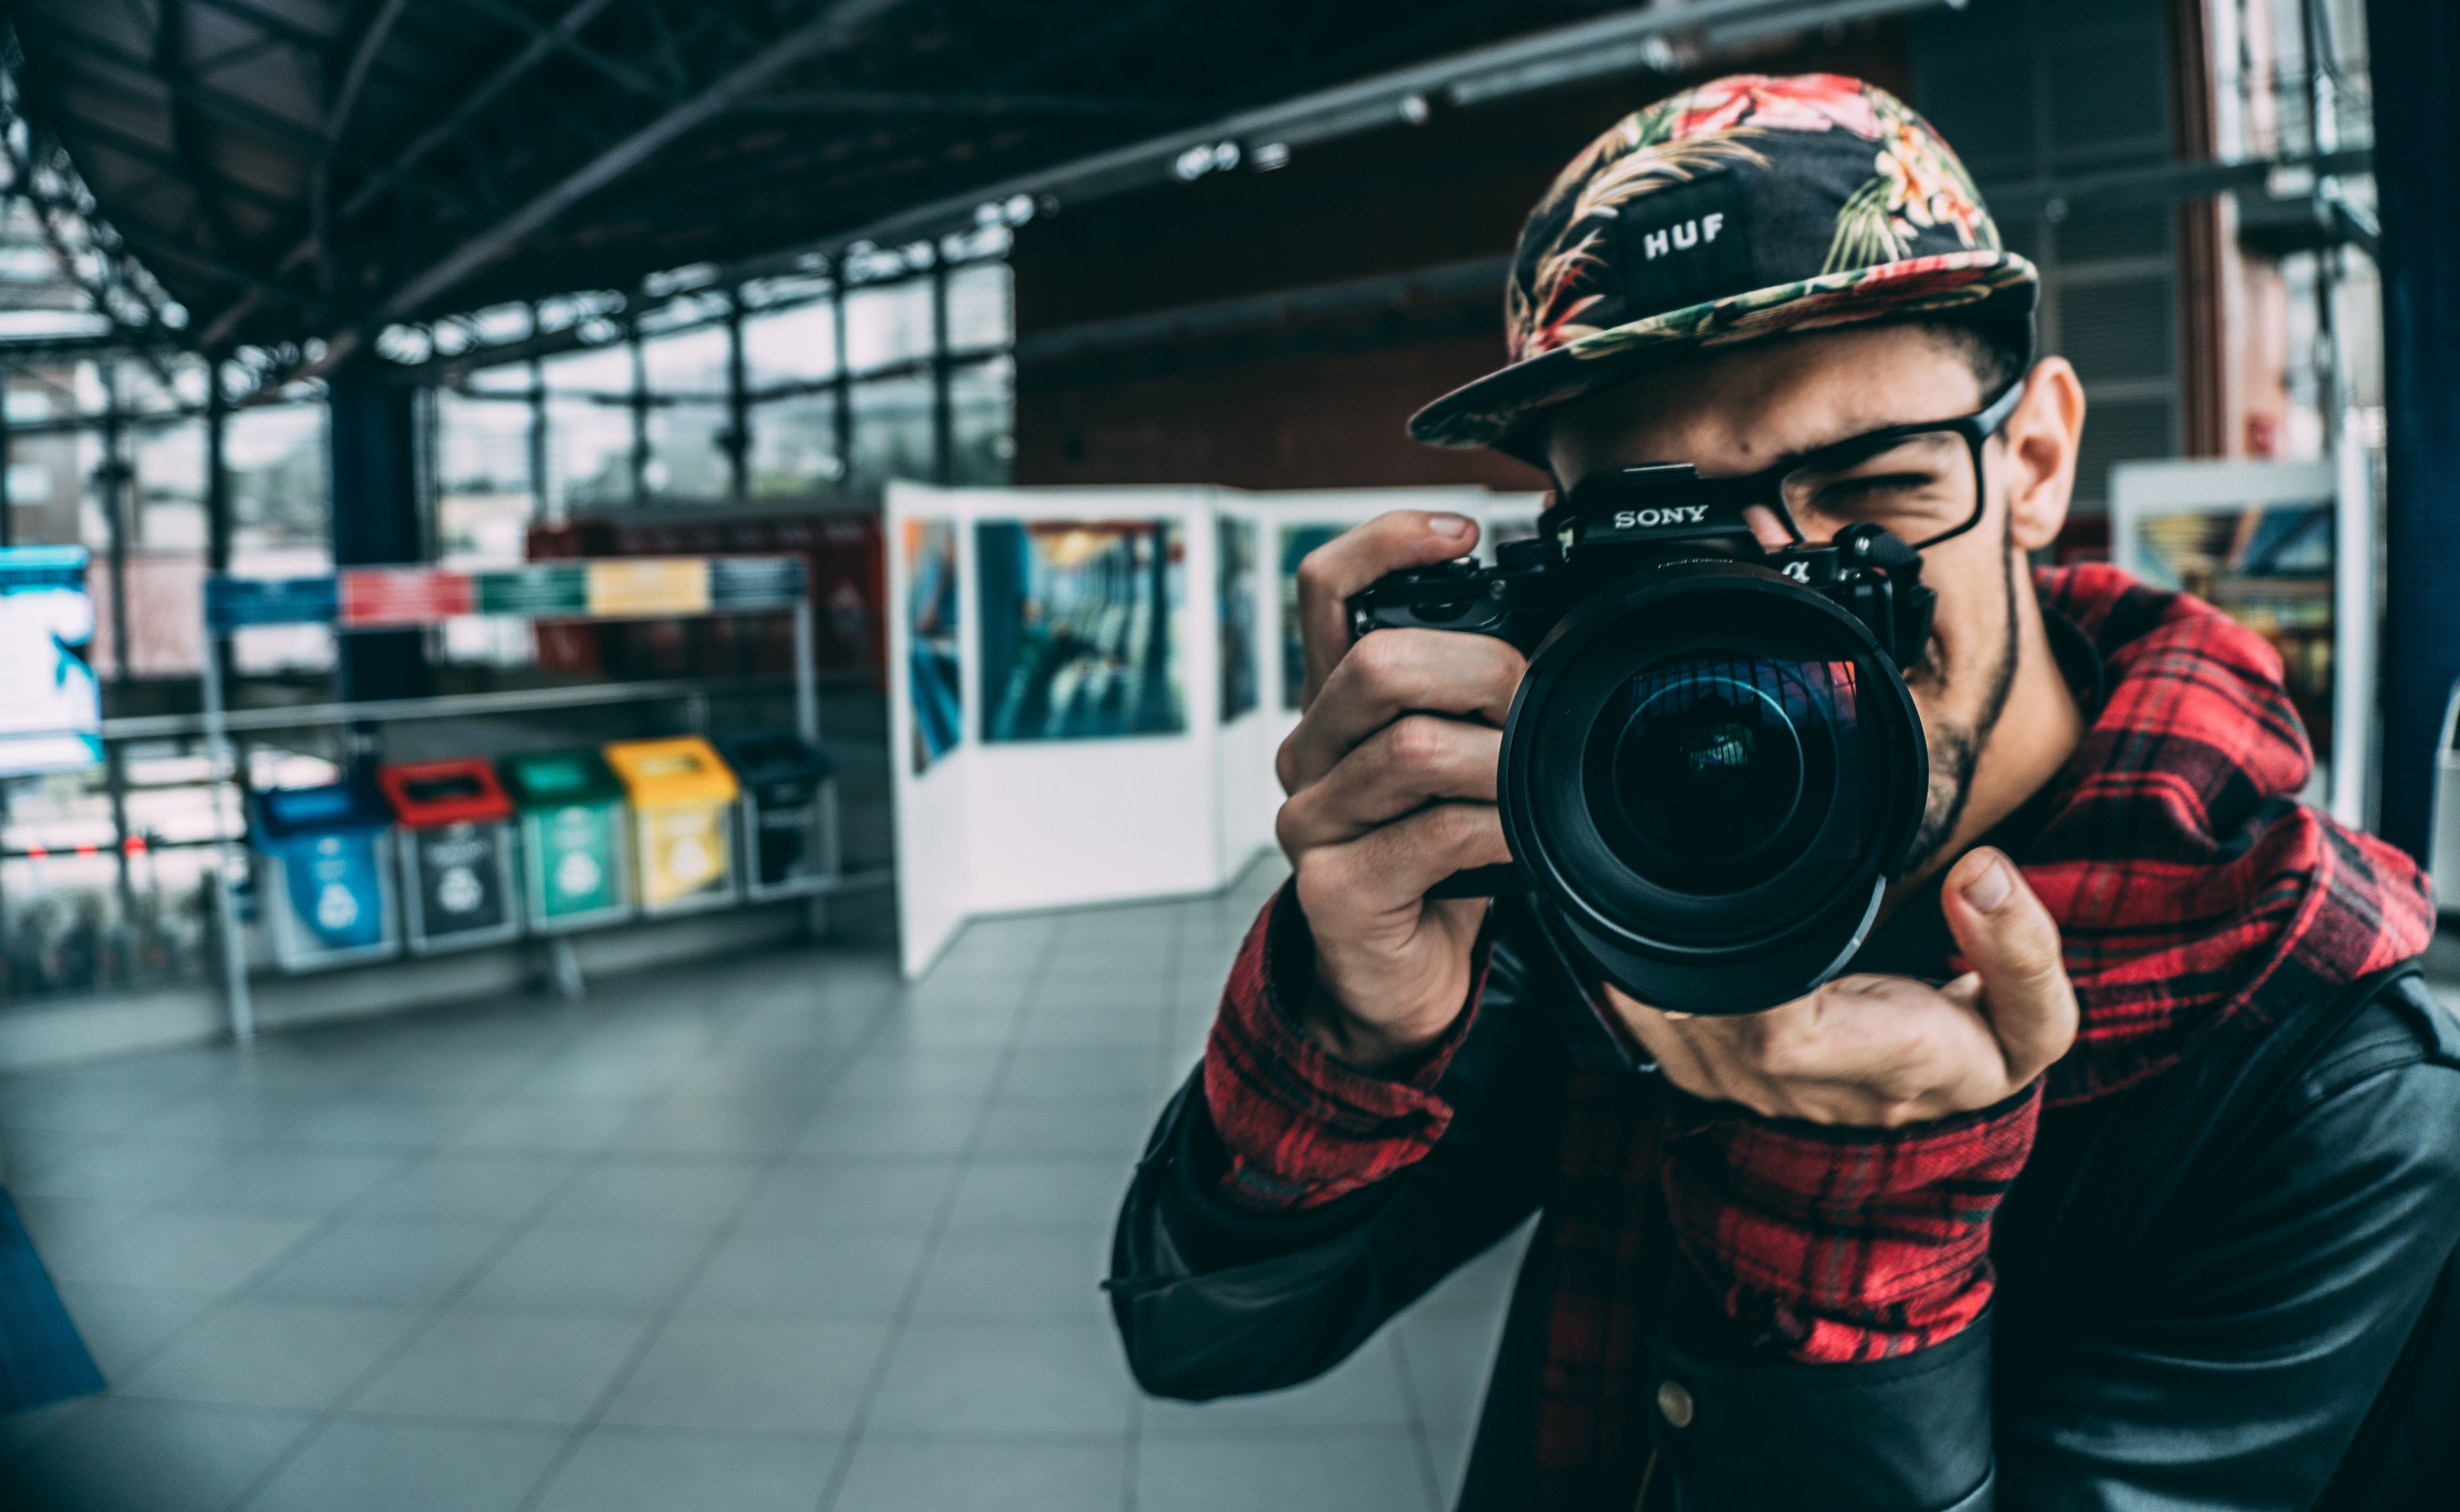 Curtis loved photography. | Source: Pexels